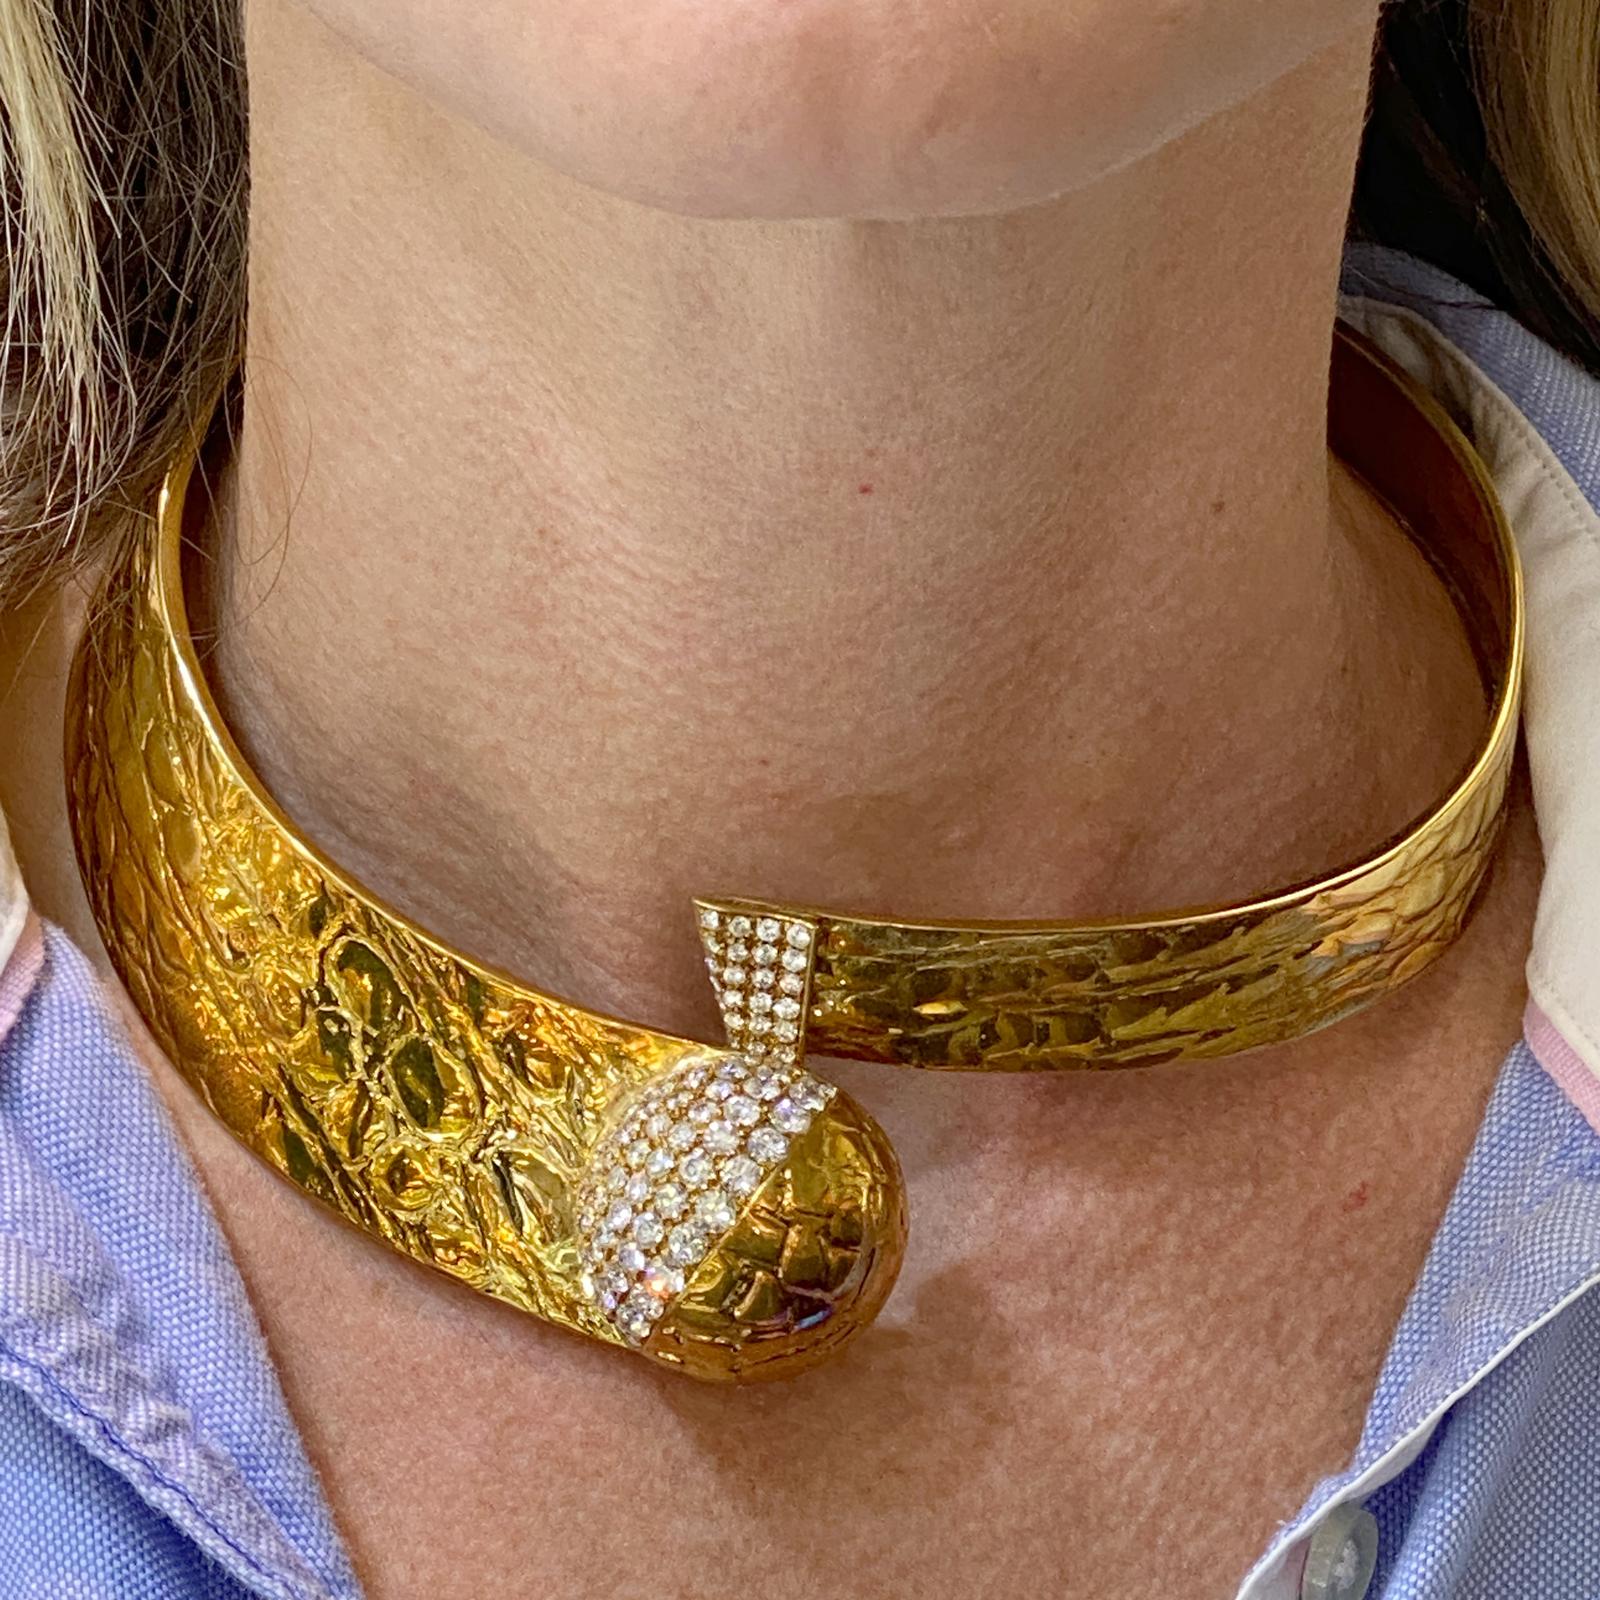 Custom designer diamond necklace by Gucci. This one of a kind necklace is fashioned in textured 18 karat yellow gold. The bypass collar necklace features 87 round brilliant cut diamonds weigh approximately 6.33 carat total weight and are graded F-G